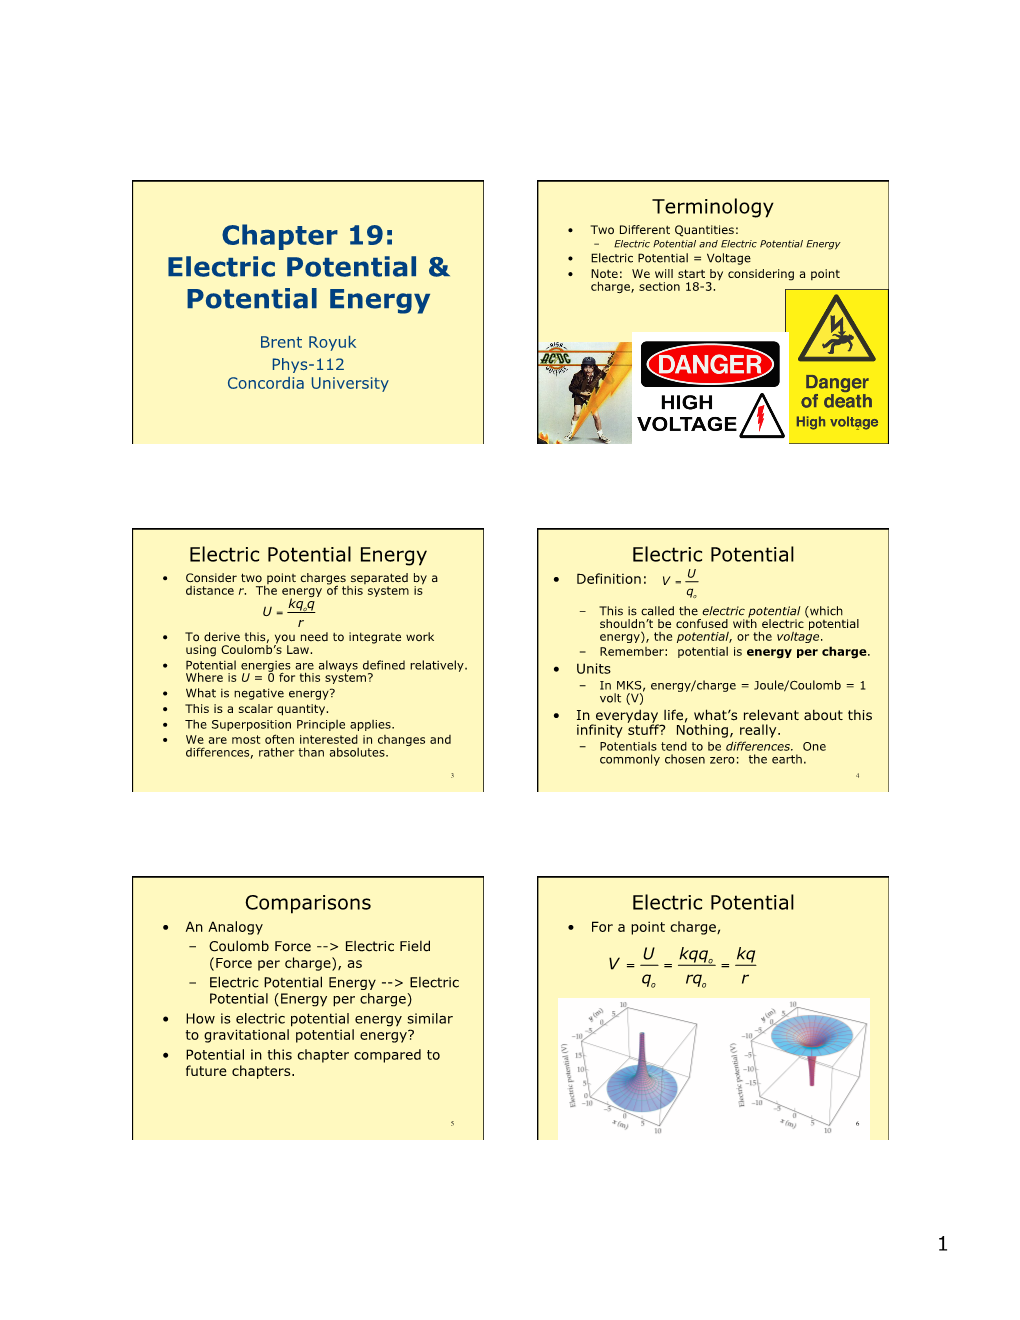 Chapter 19: Electric Potential & Potential Energy